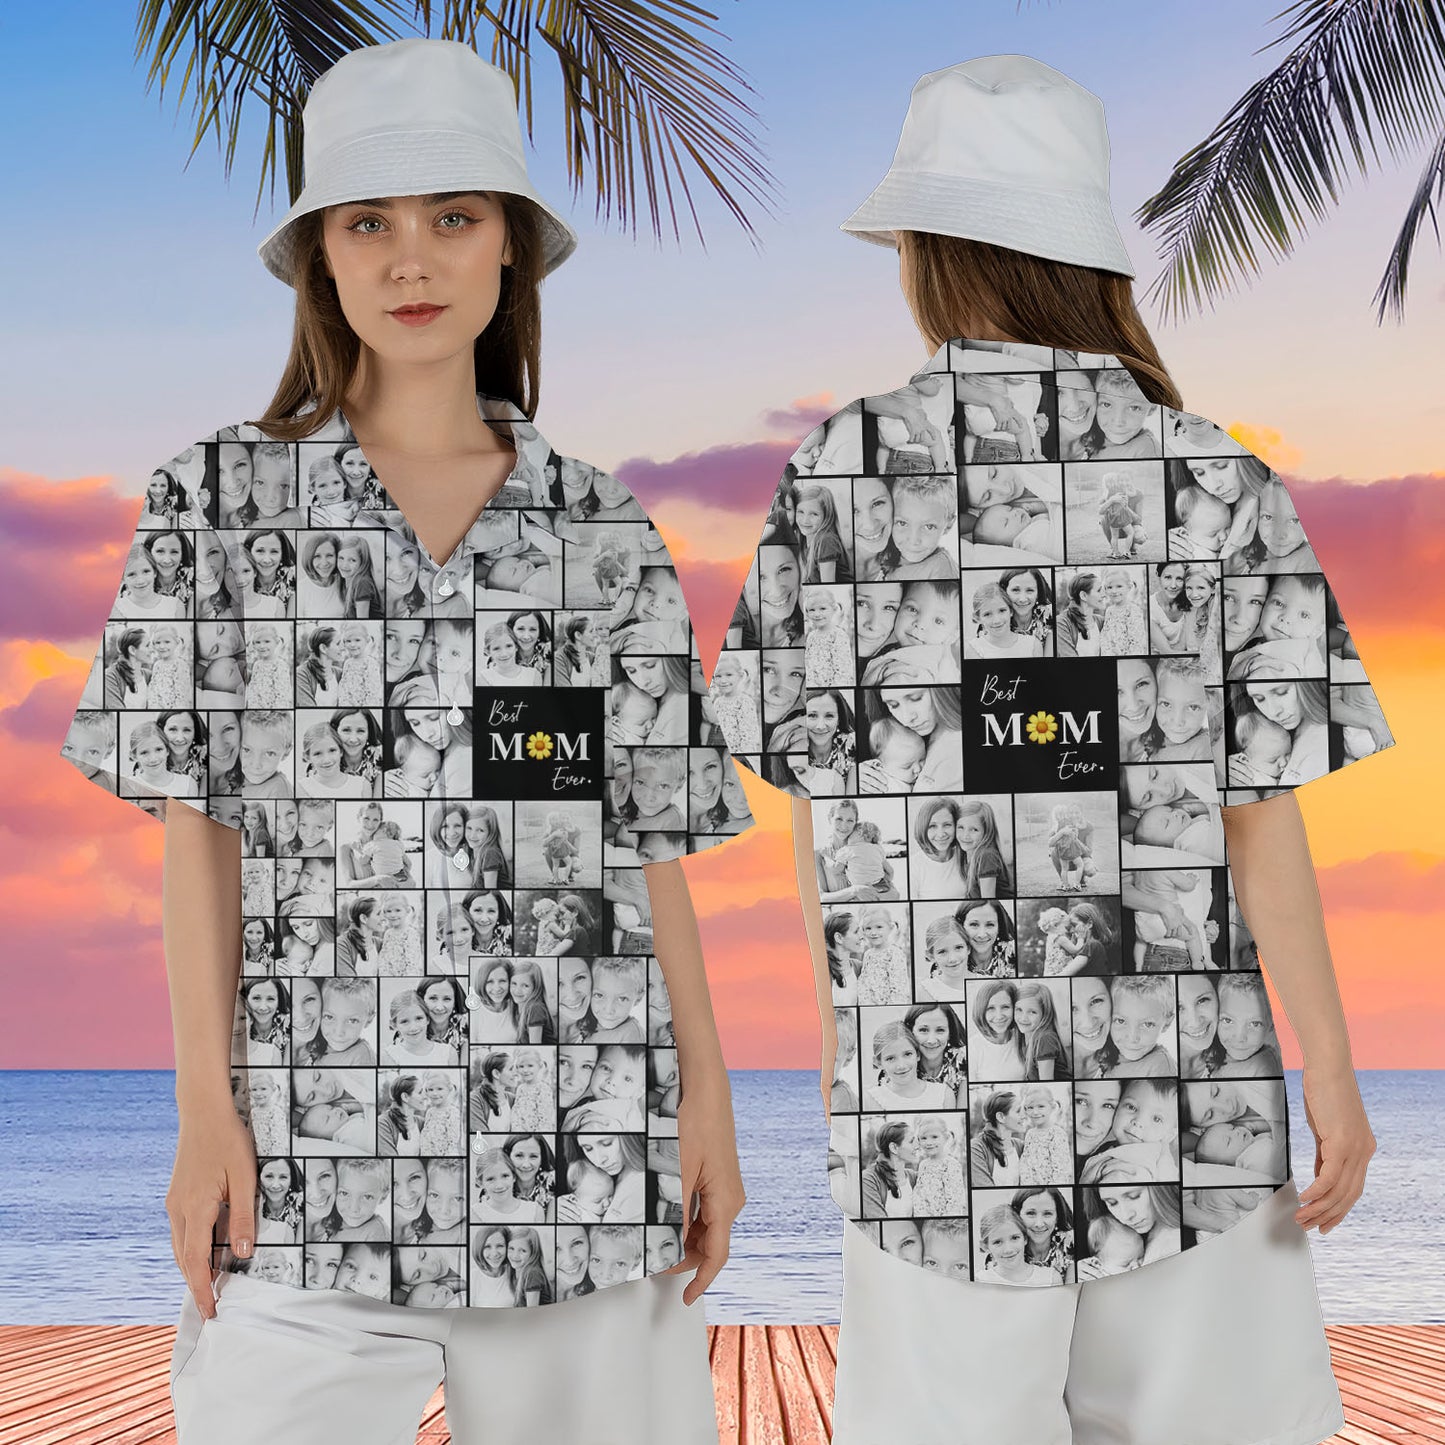 Create a Mother's Day Gift for Mom with Collage Photo & Text on Unisex Hawaiian Shirt